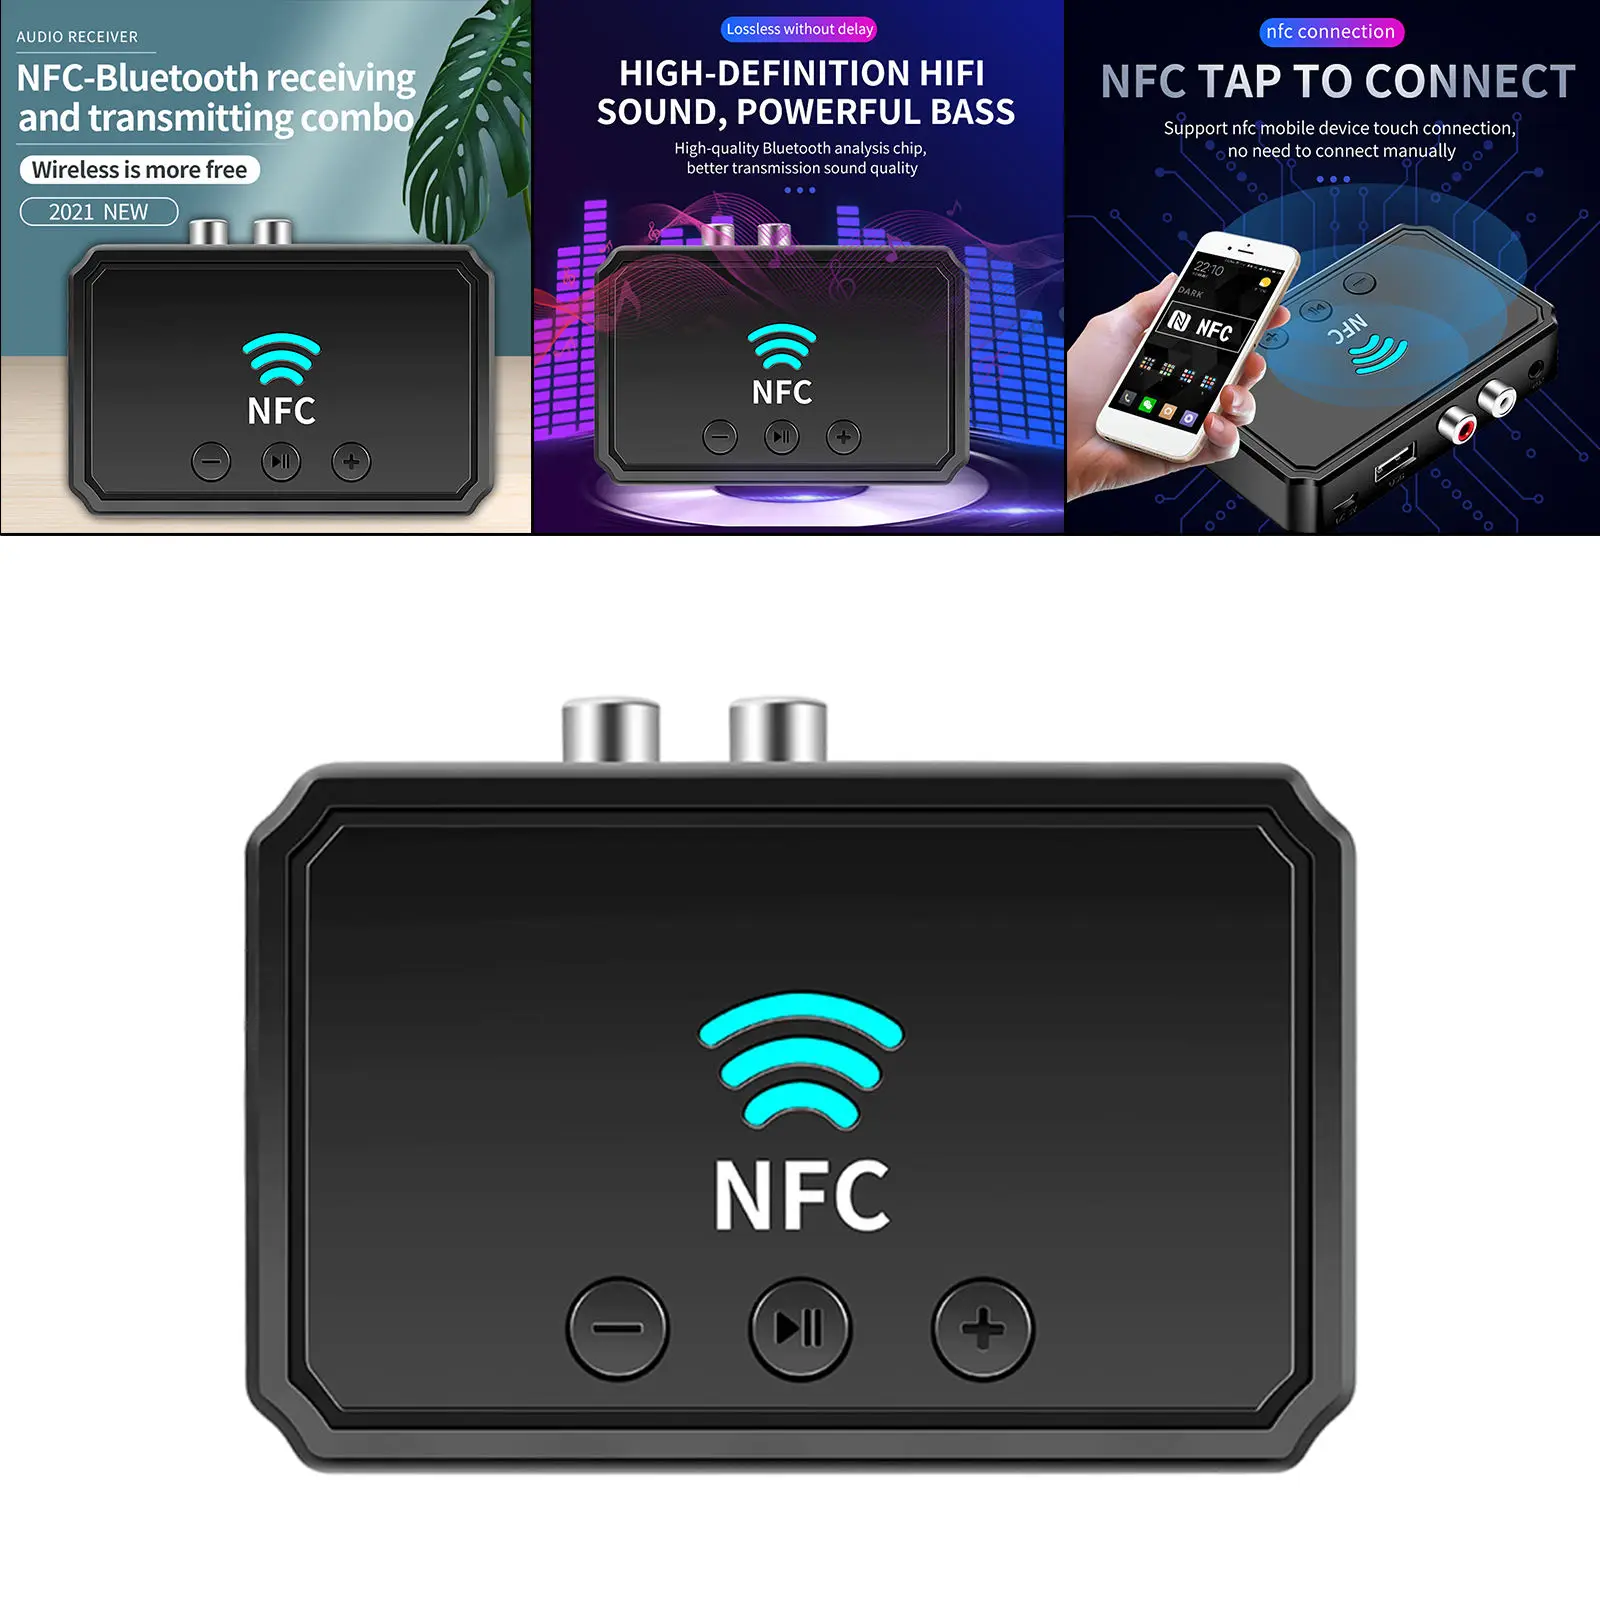 NFC Bluetooth 5.0 Audio Adapter Transmitter Stereo Sound System Wireless Plug and Play Receiver for Phones Speaker TV Home